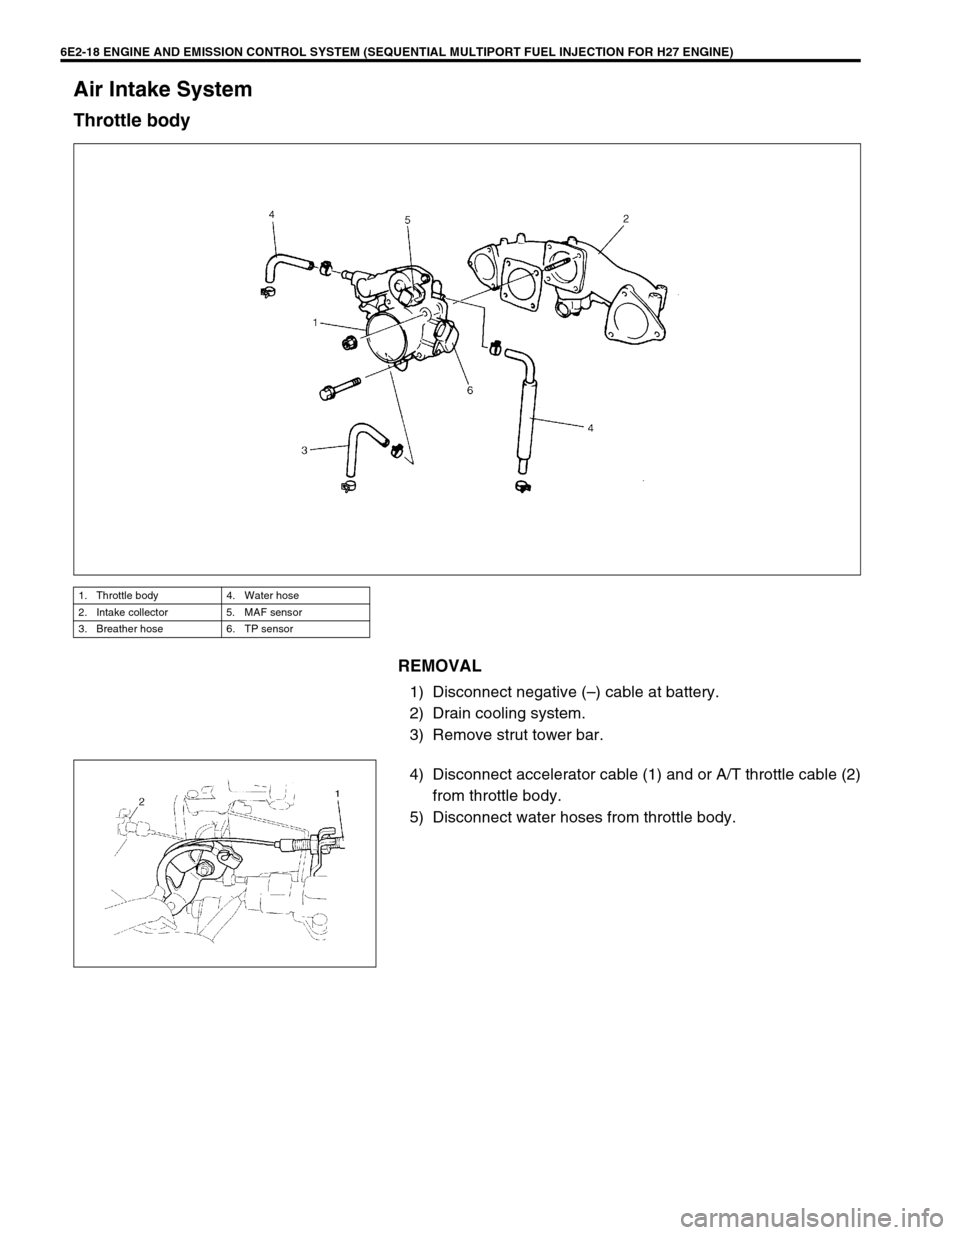 SUZUKI GRAND VITARA 2001 2.G User Guide 6E2-18 ENGINE AND EMISSION CONTROL SYSTEM (SEQUENTIAL MULTIPORT FUEL INJECTION FOR H27 ENGINE)
Air Intake System
Throttle body
REMOVAL
1) Disconnect negative (–) cable at battery.
2) Drain cooling s